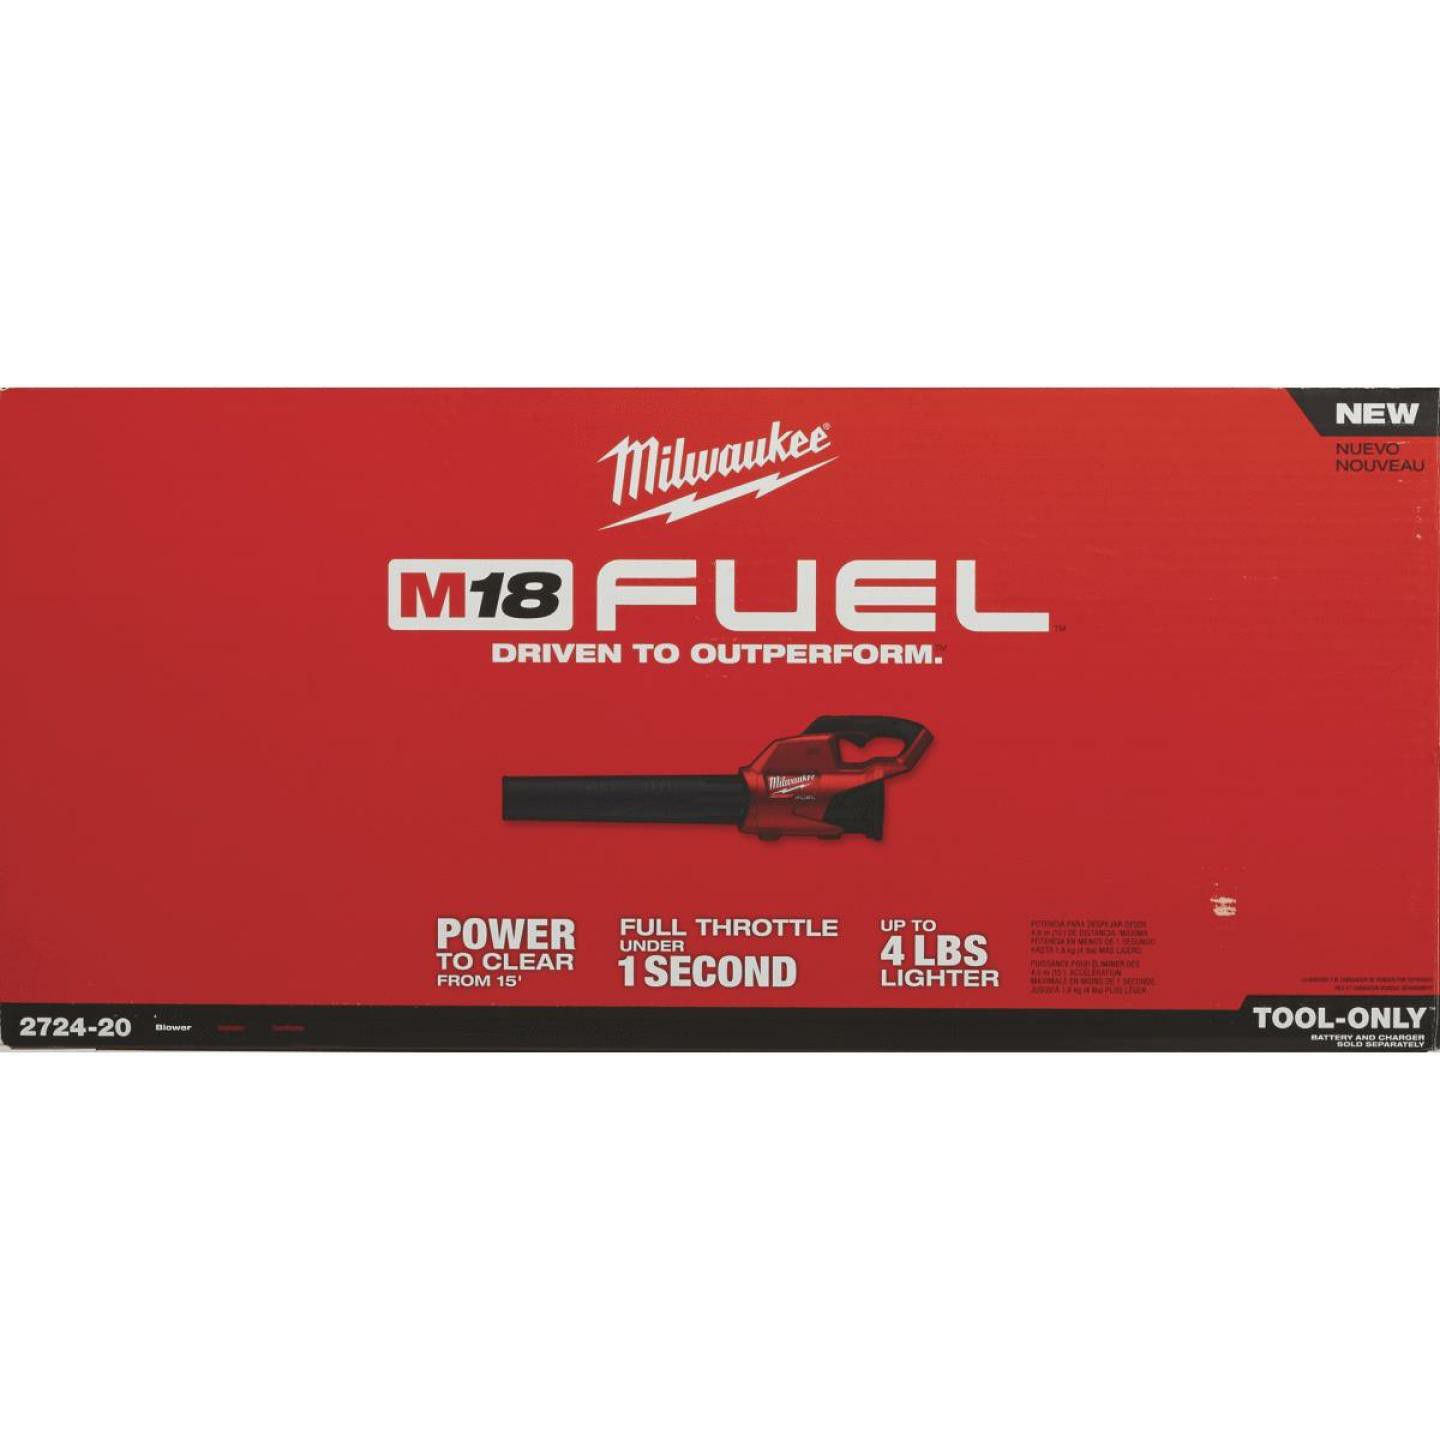 Brand New Milwaukee Fuel M18 Leaf Blower 2724-20 *tool only*